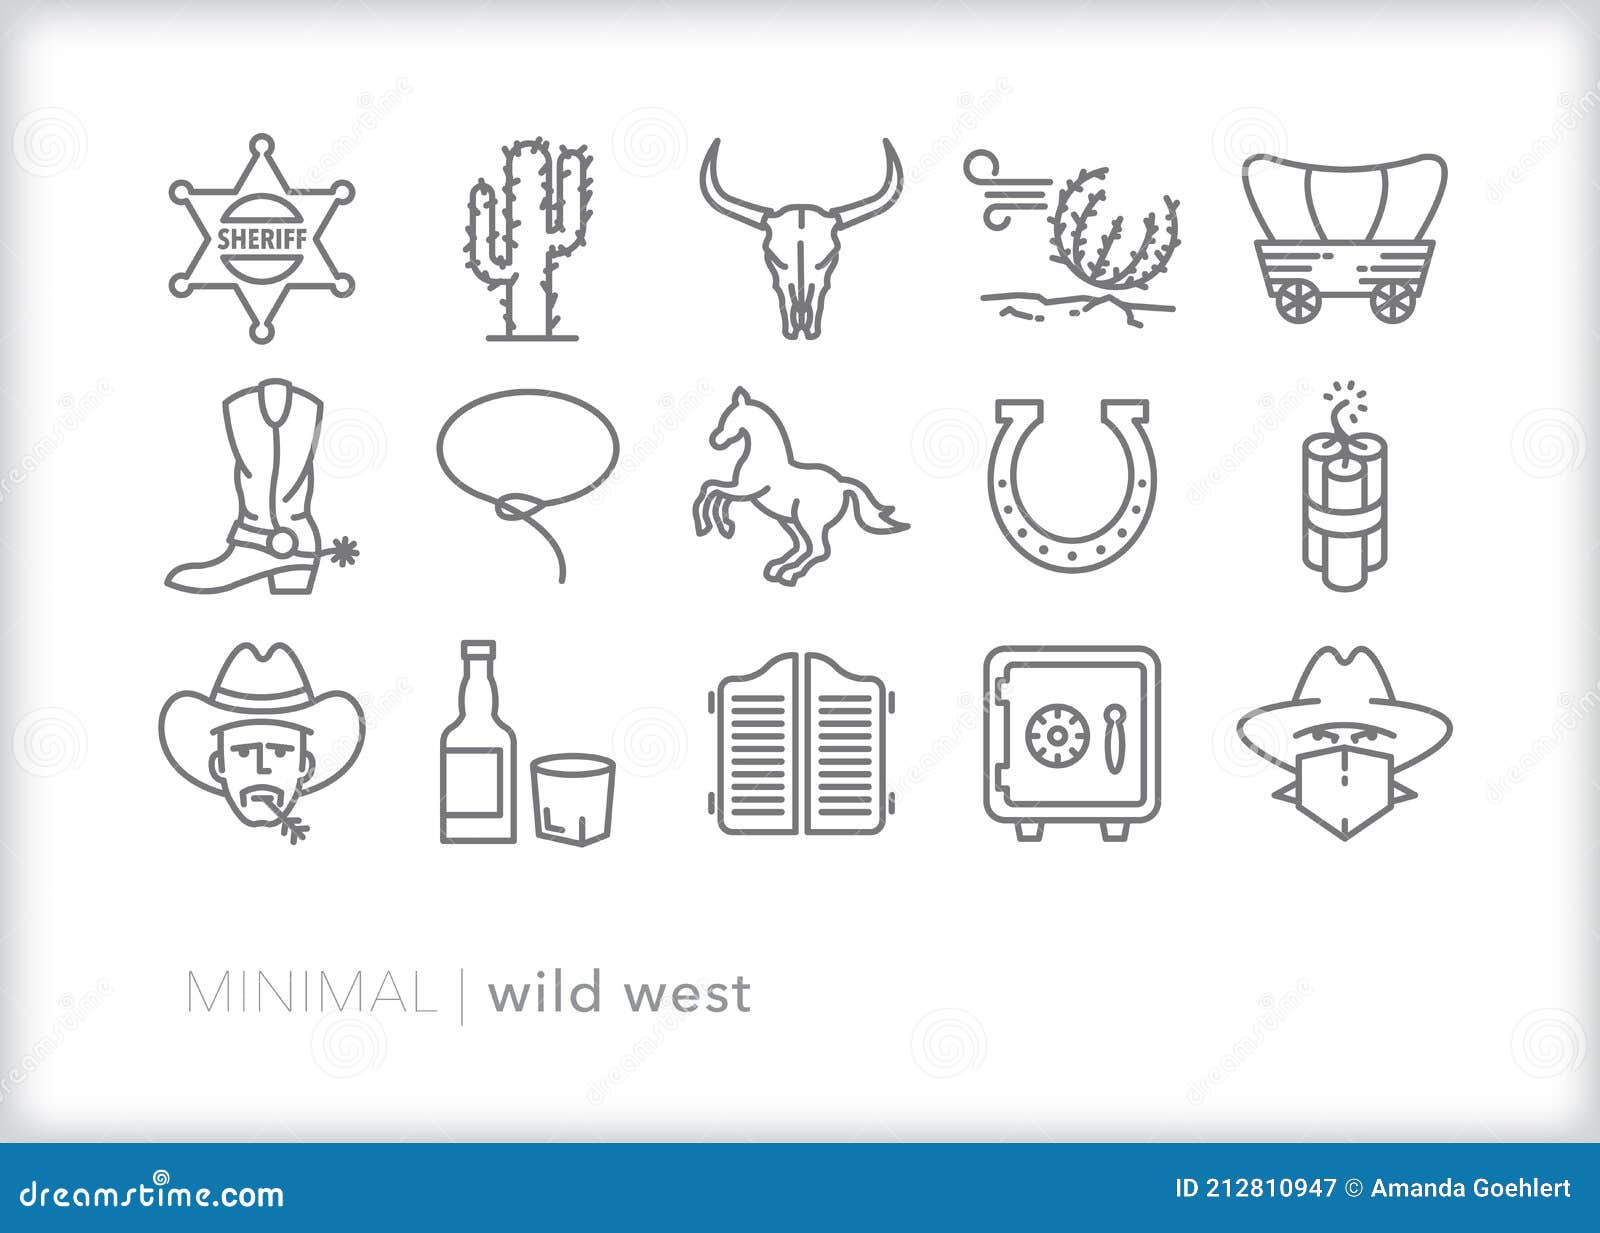 wild west outline icons of cowboys and robbers in the american west